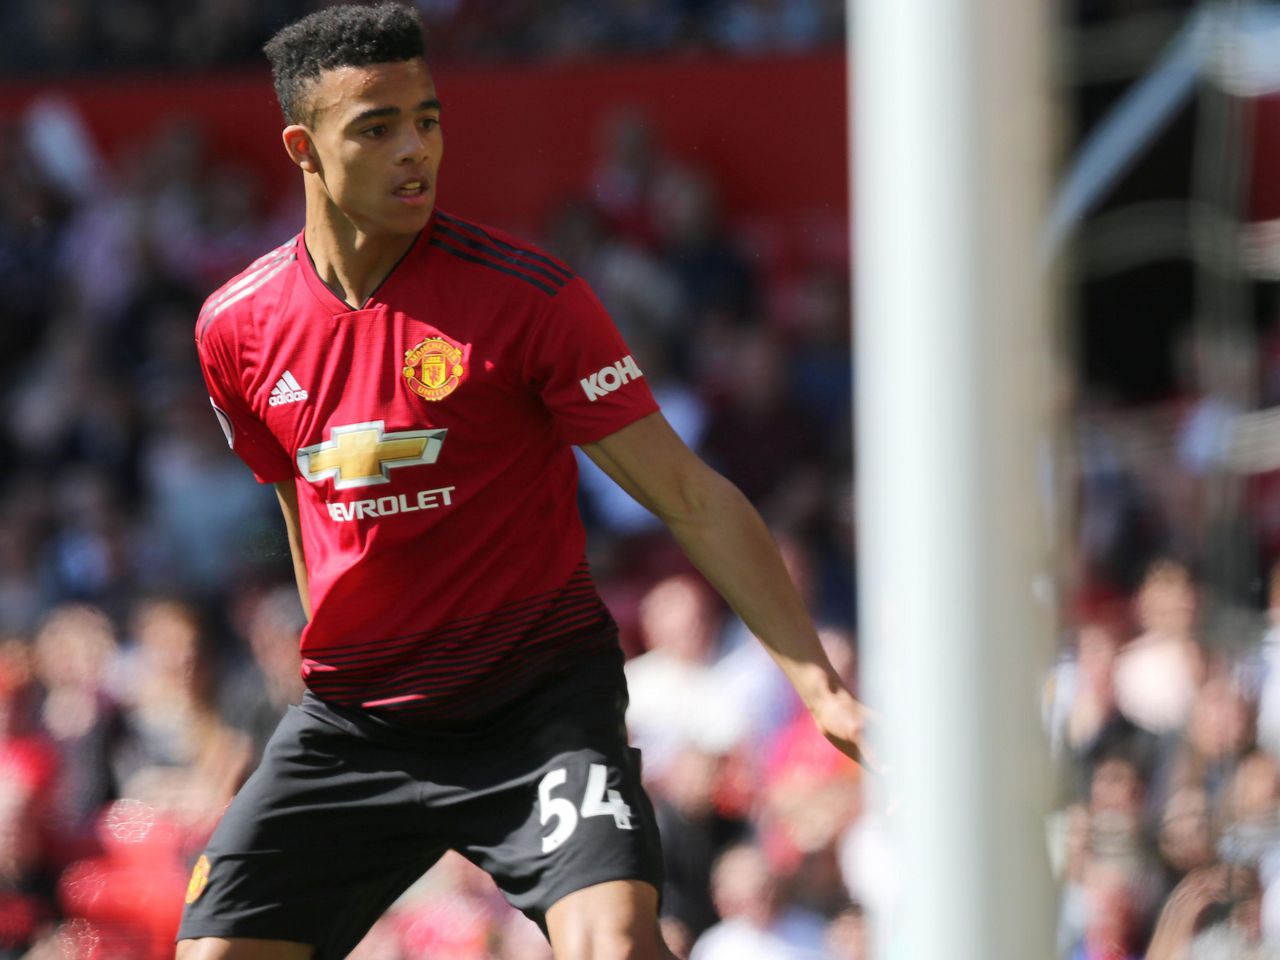 Mason Greenwood can be proud of full Man United debut at Old